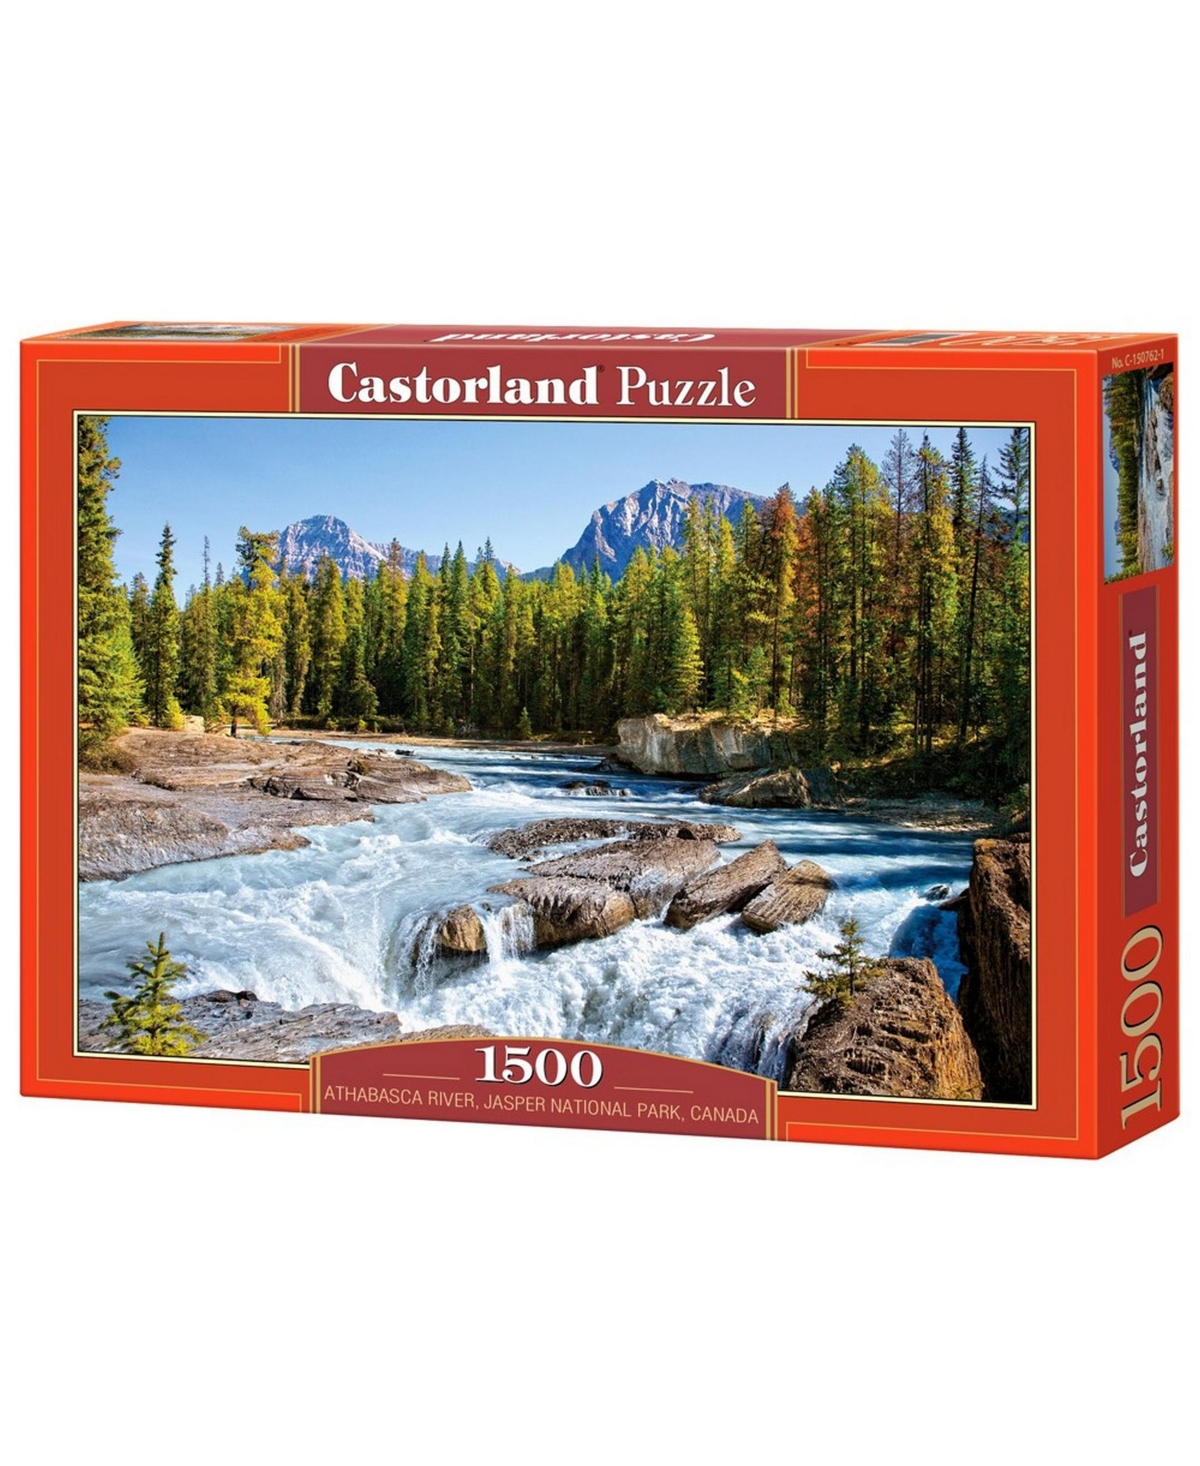 Castorland Kids' Athabasca River, Jasper National Park, Canada Jigsaw Puzzle Set, 1500 Piece In Multicolor